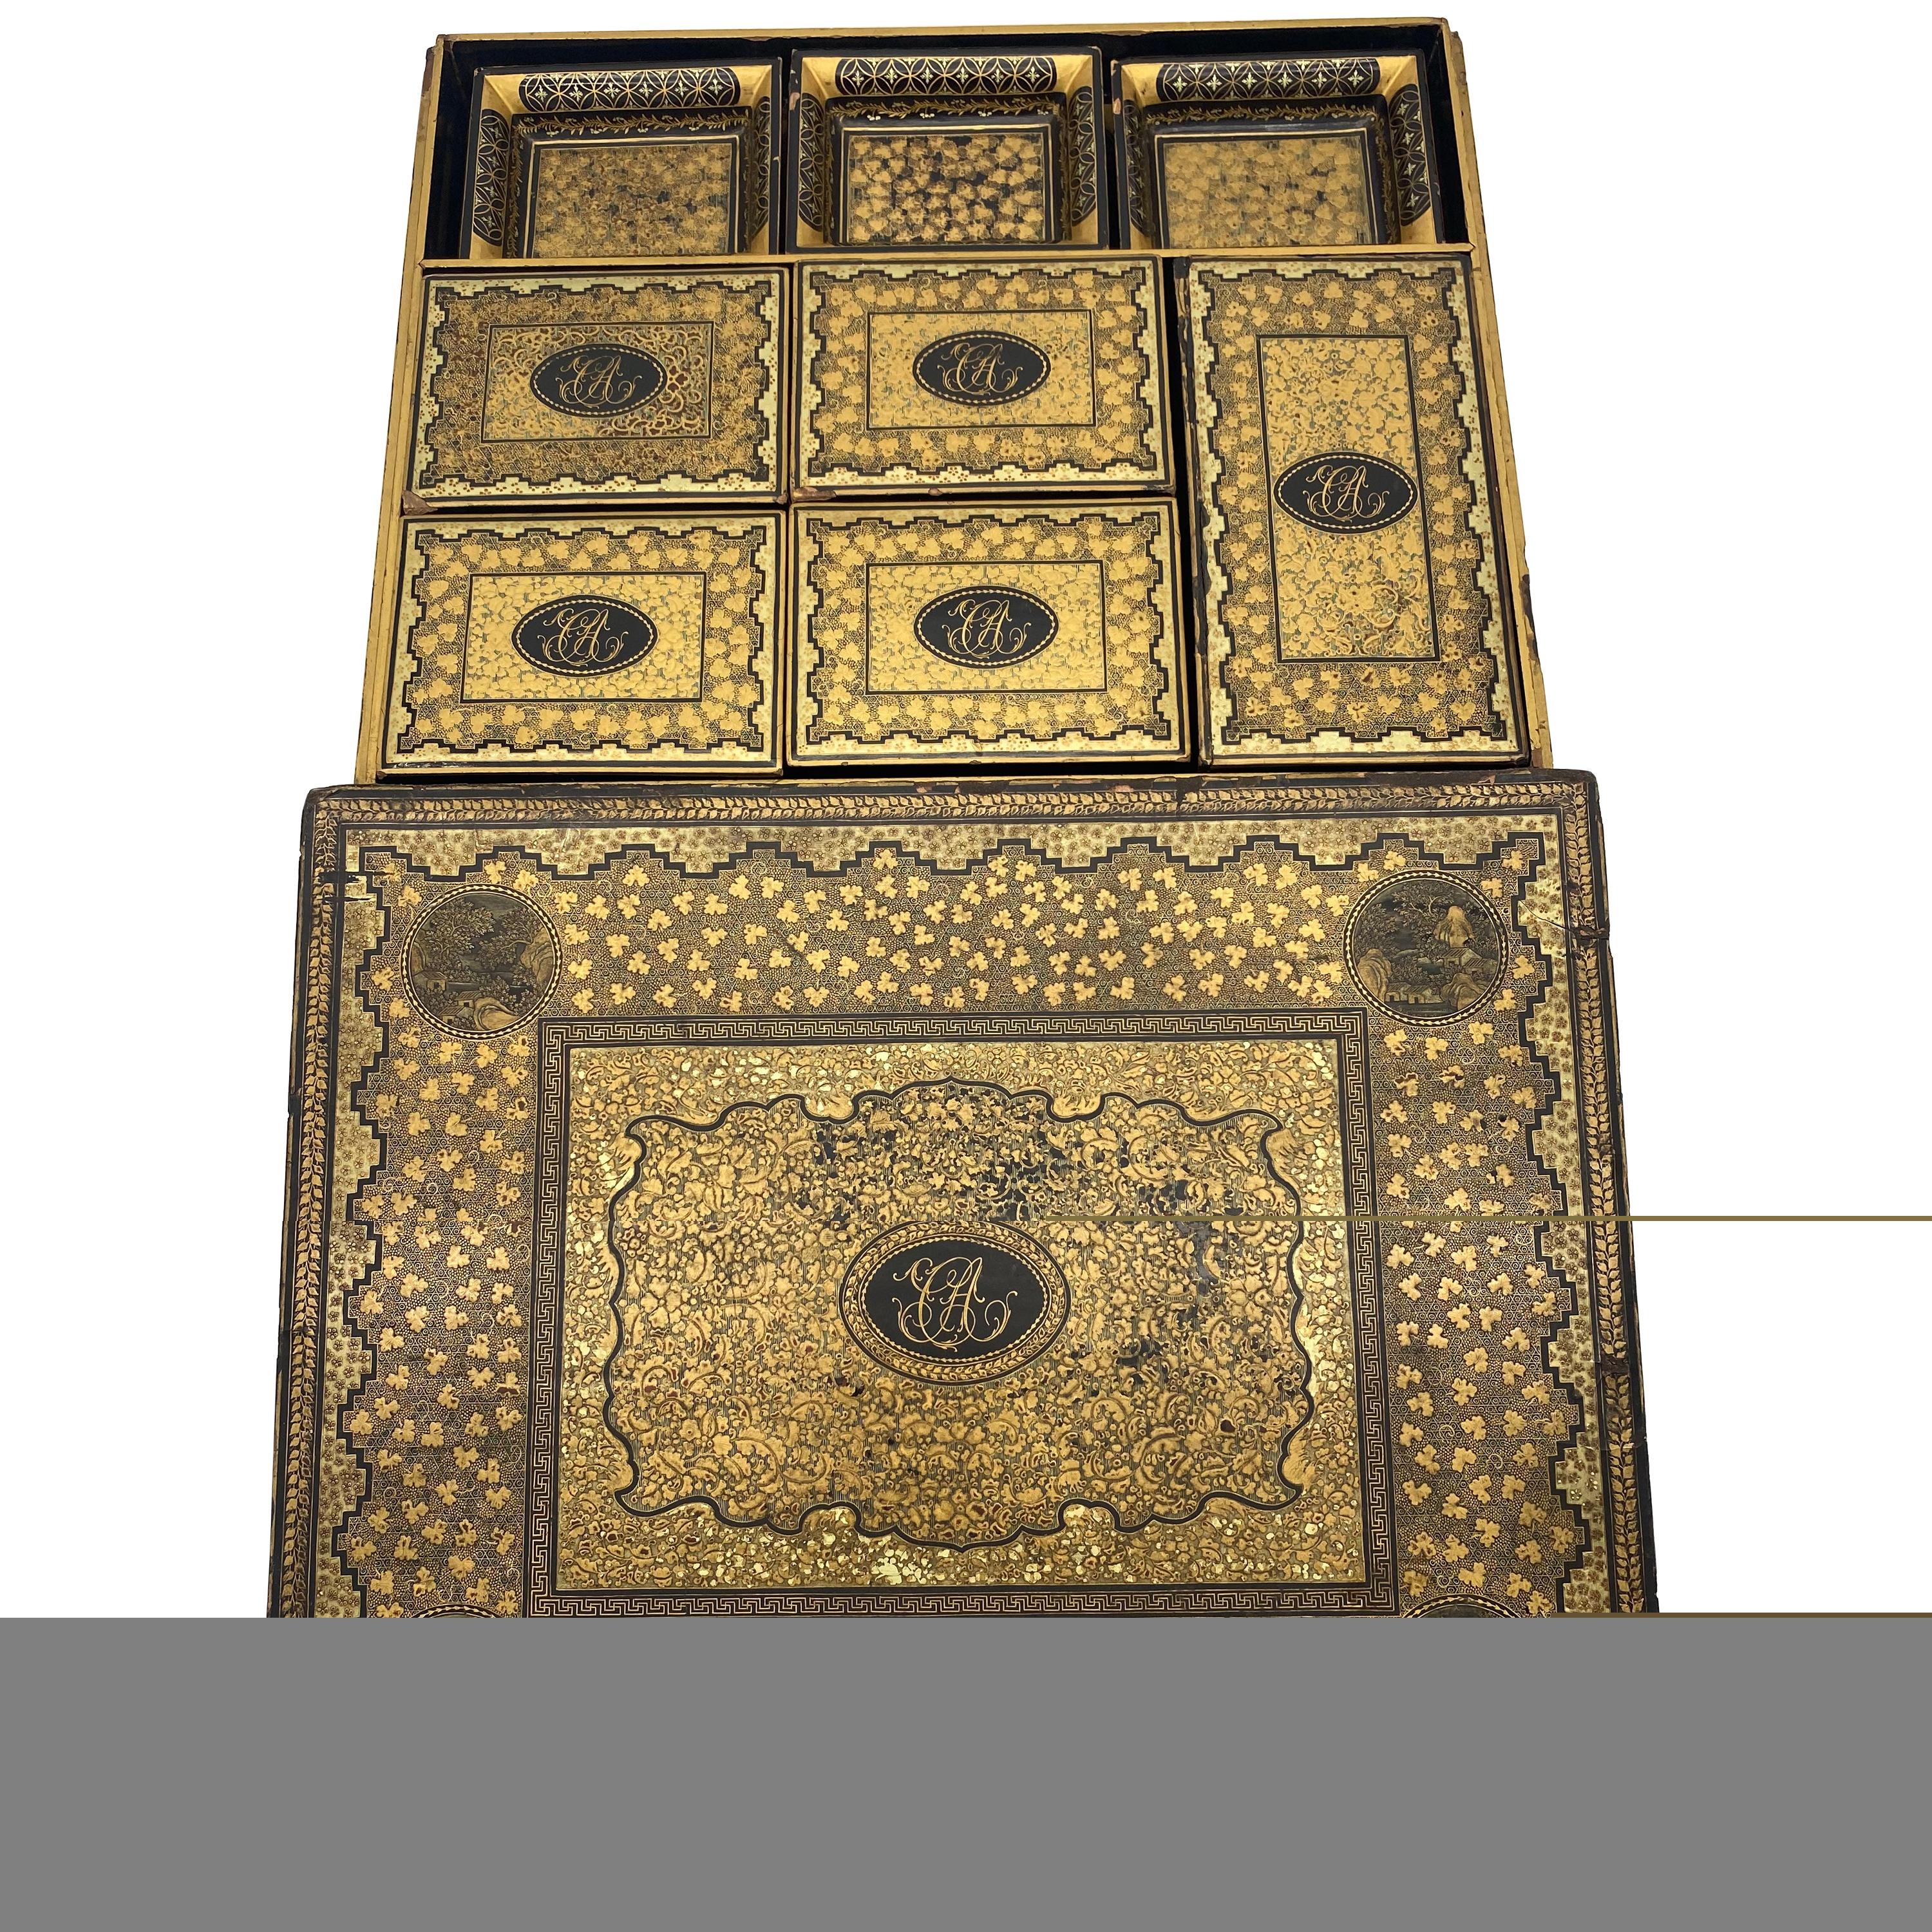 Very rare complete circa 1820 Chinese gilt lacquer gambling storage box trays and dishes. A great and complete gold and black lacquered gaming set. Measures: Outer box 14.5 in x 12 in x 2.75 in. Largest interior box 7 in x 3.75 in. Largest tray